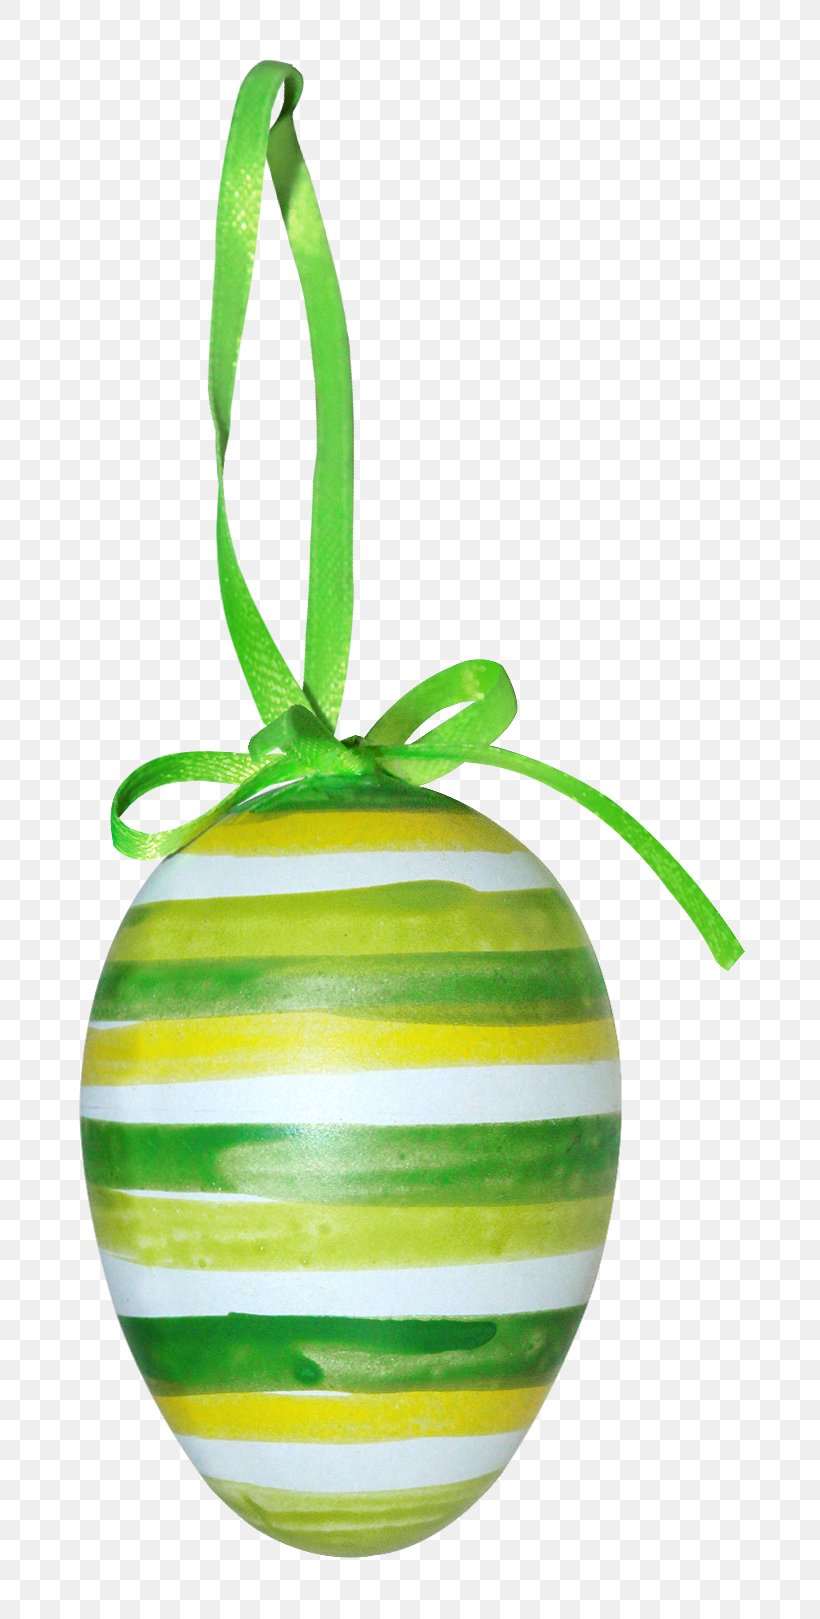 Textile Green Clip Art, PNG, 800x1619px, Textile, Easter, Easter Egg, Food, Fruit Download Free